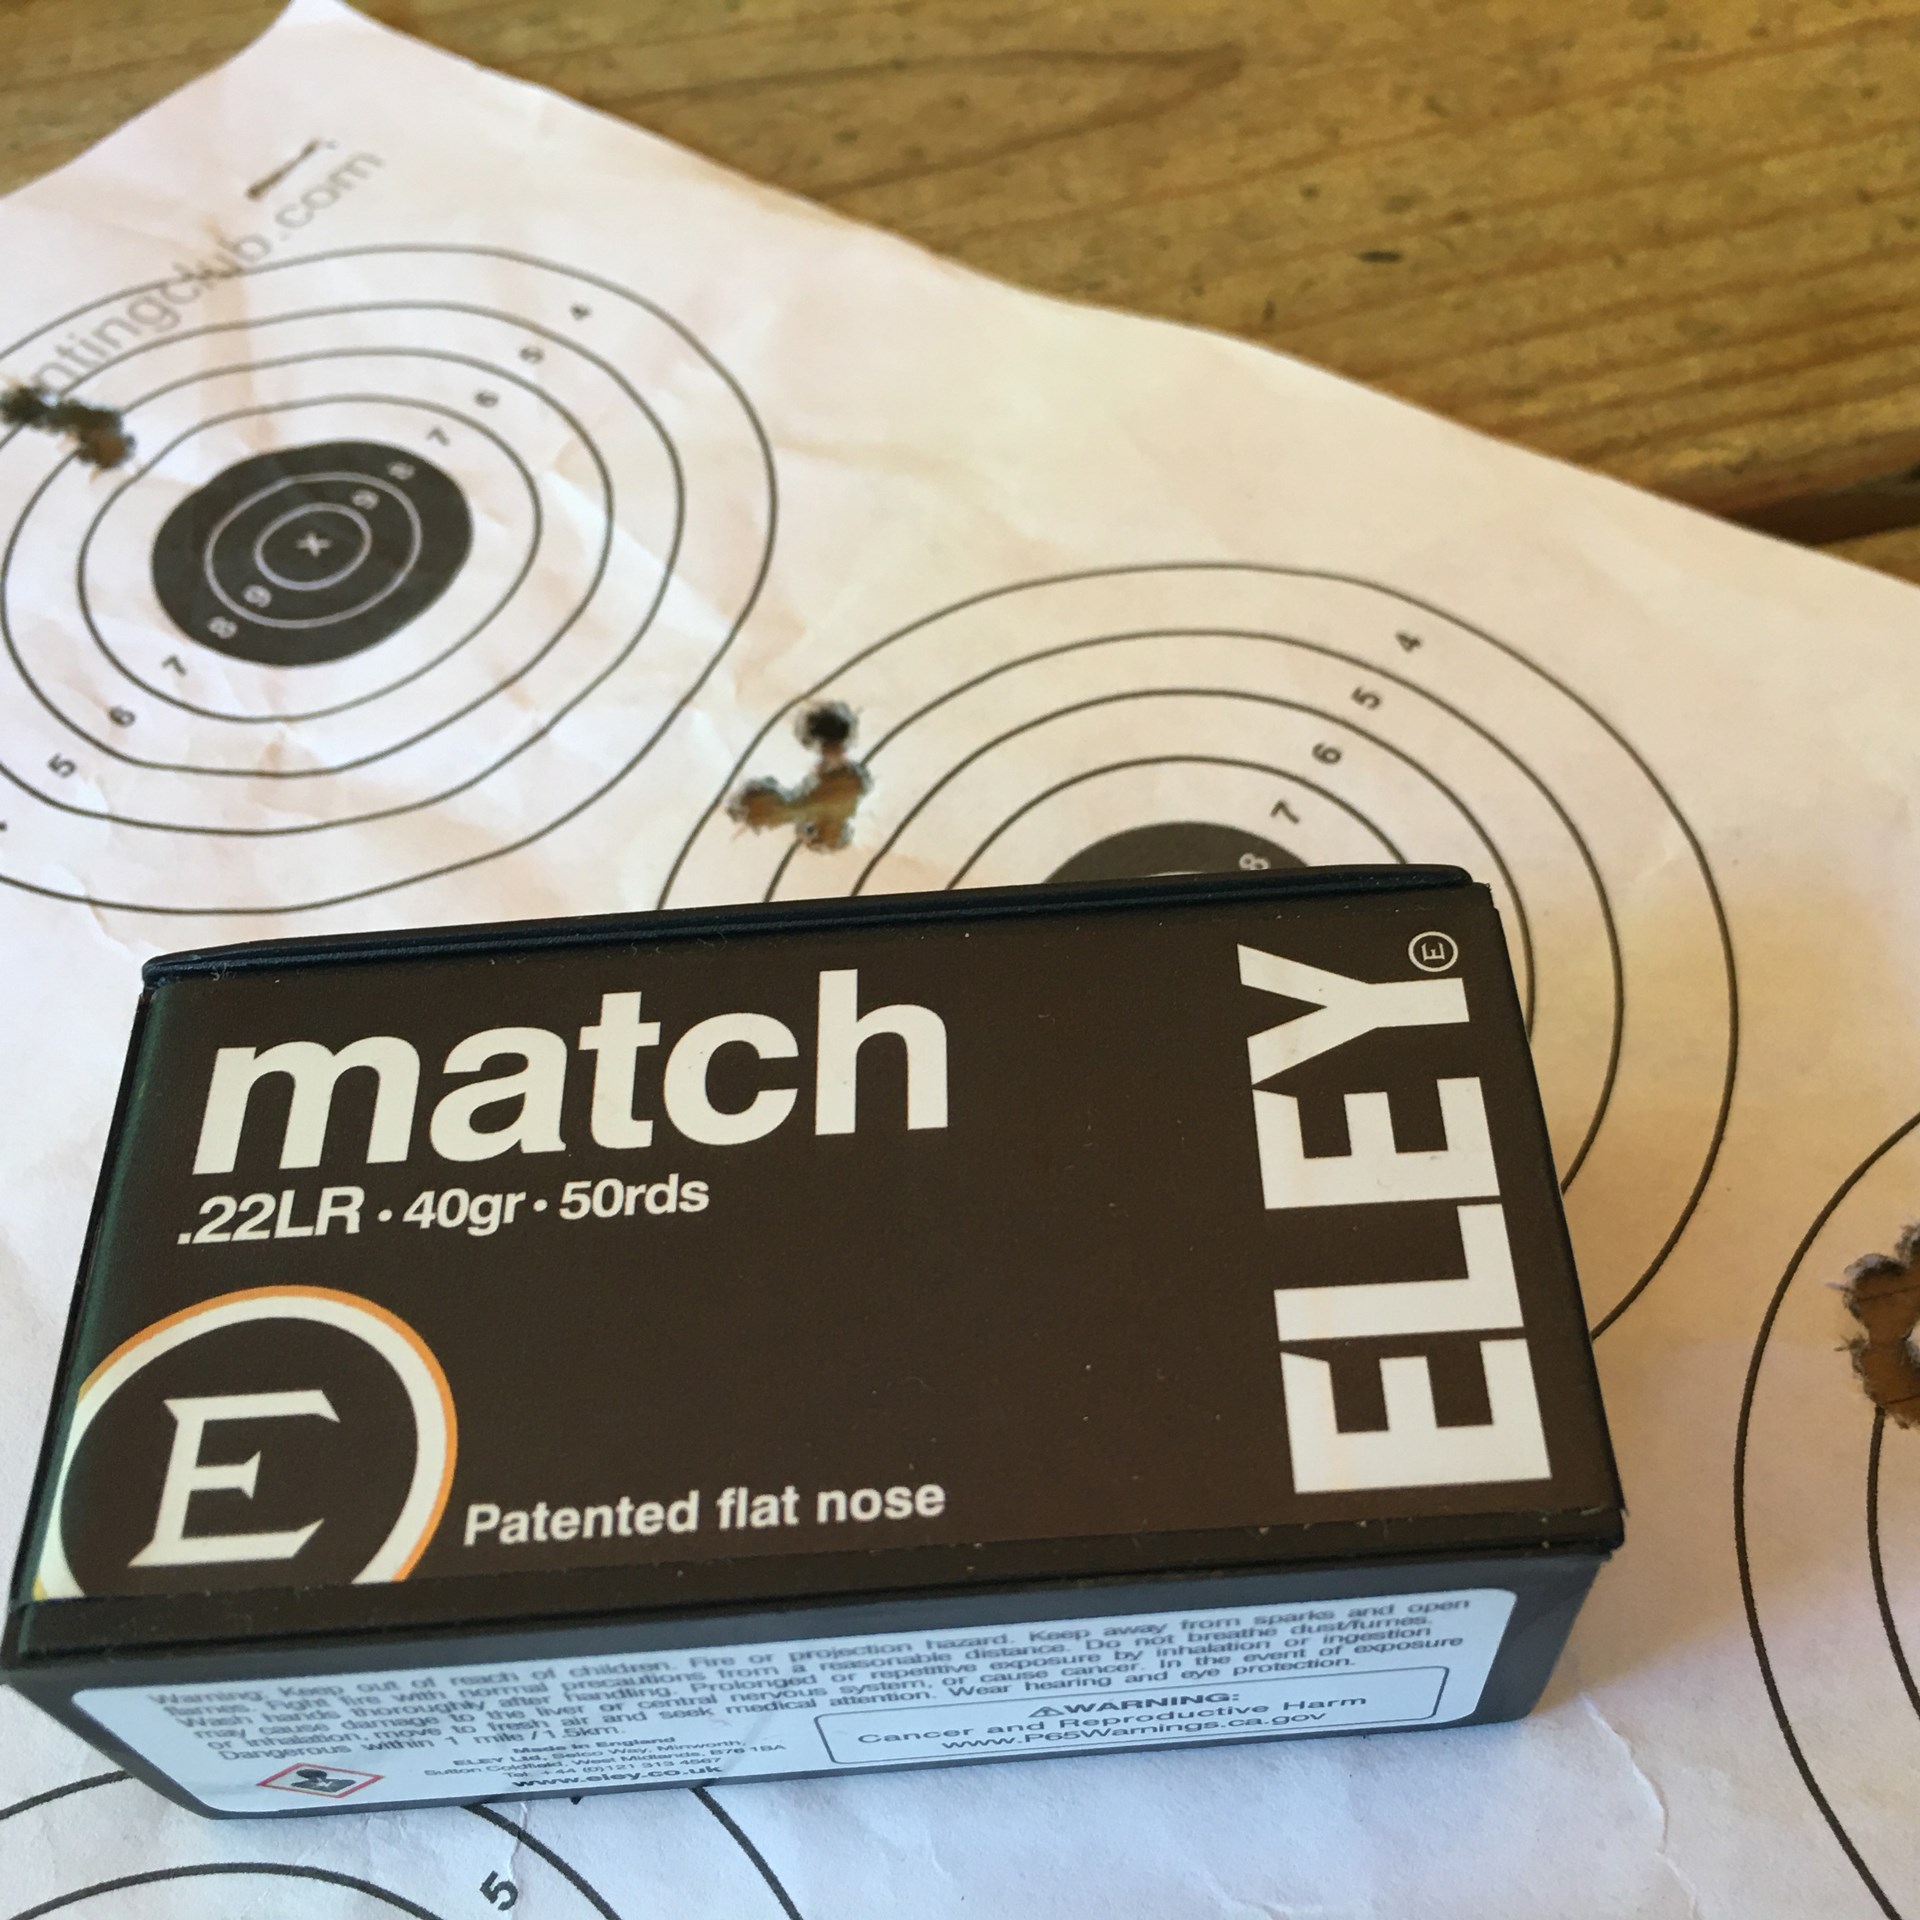 Eley Match .22LR ammunition box shown with white bullseye target and accuracy holes groups